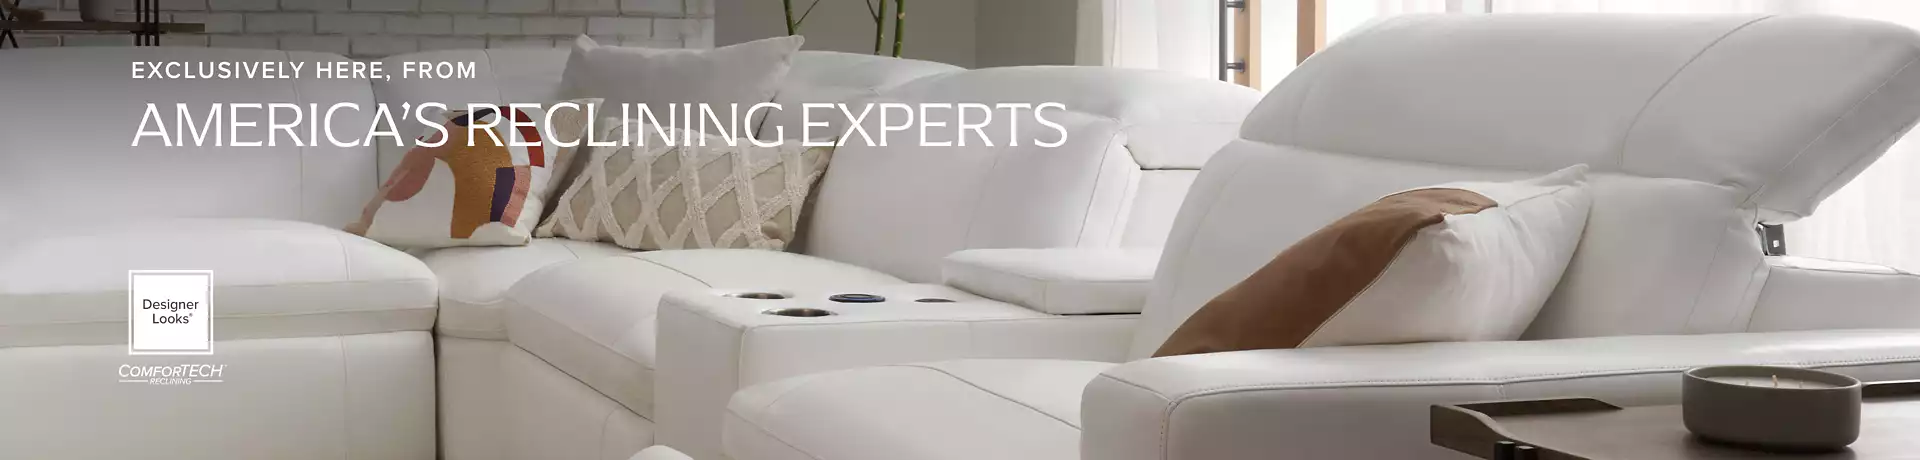 Exclusively Here, From America's Reclining Experts